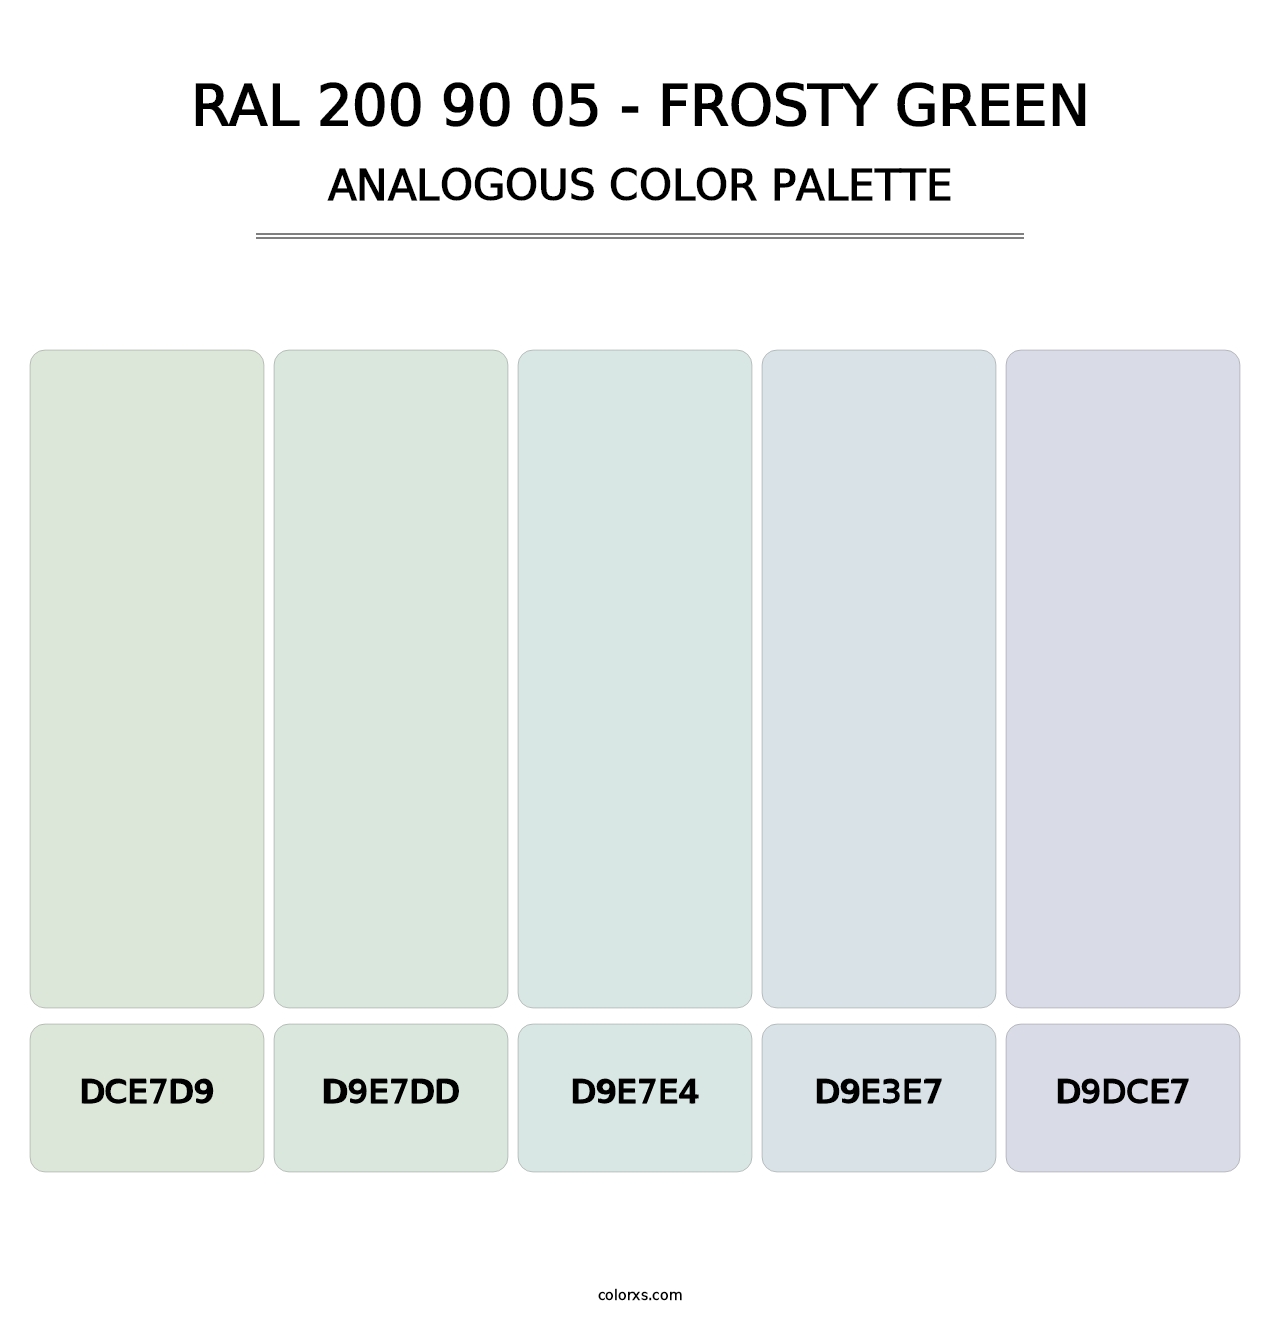 RAL 200 90 05 - Frosty Green - Analogous Color Palette